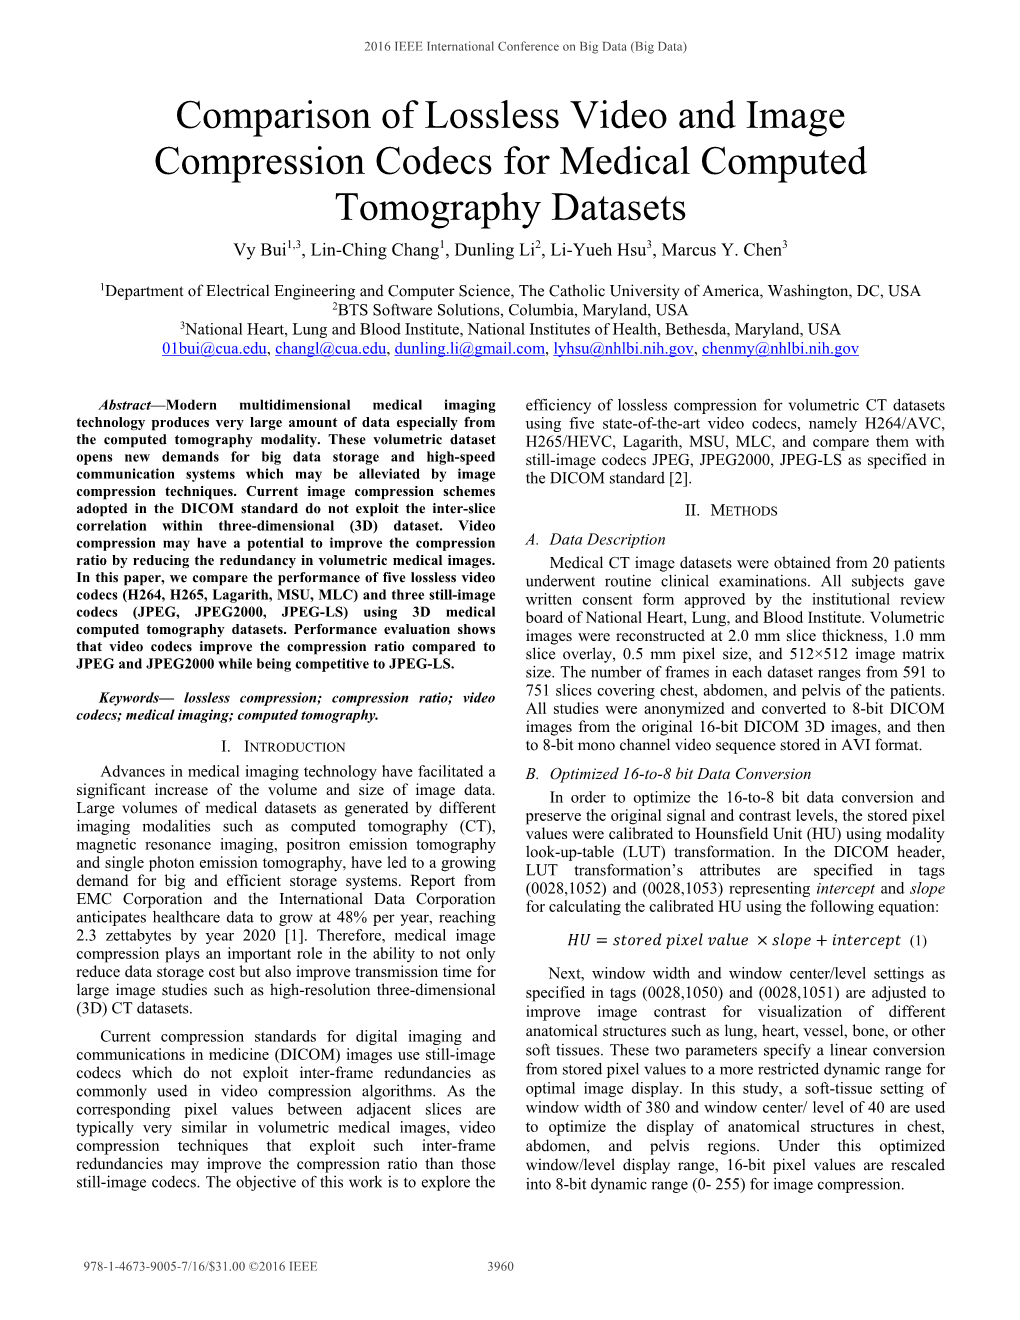 Comparison of Lossless Video and Image Compression Codecs for Medical Computed Tomography Datasets Vy Bui1,3, Lin-Ching Chang1, Dunling Li2, Li-Yueh Hsu3, Marcus Y